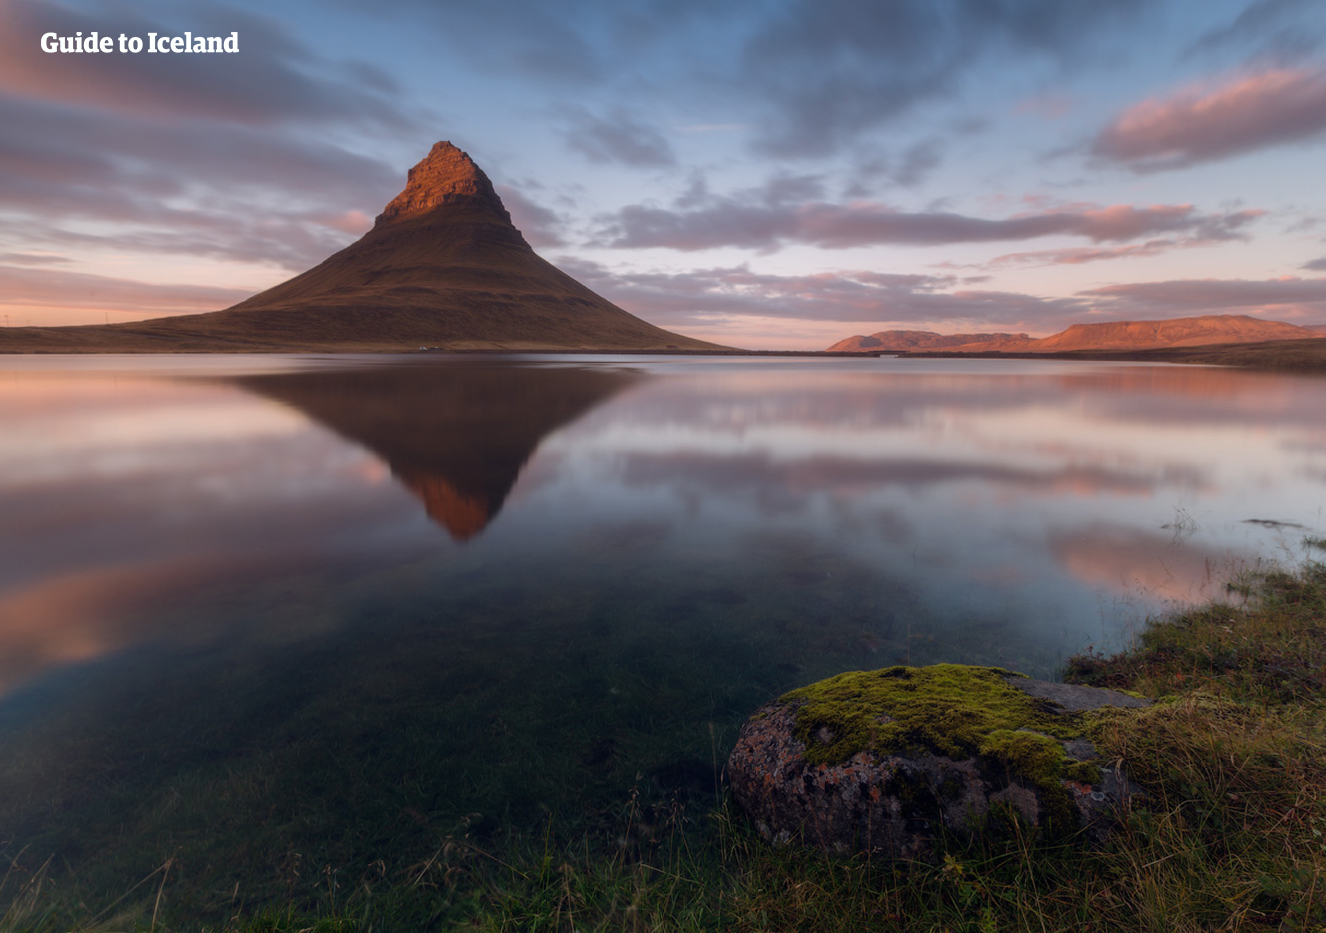 Mt. Kirkjufell mirrored in a lake during a midsummer night in Iceland.